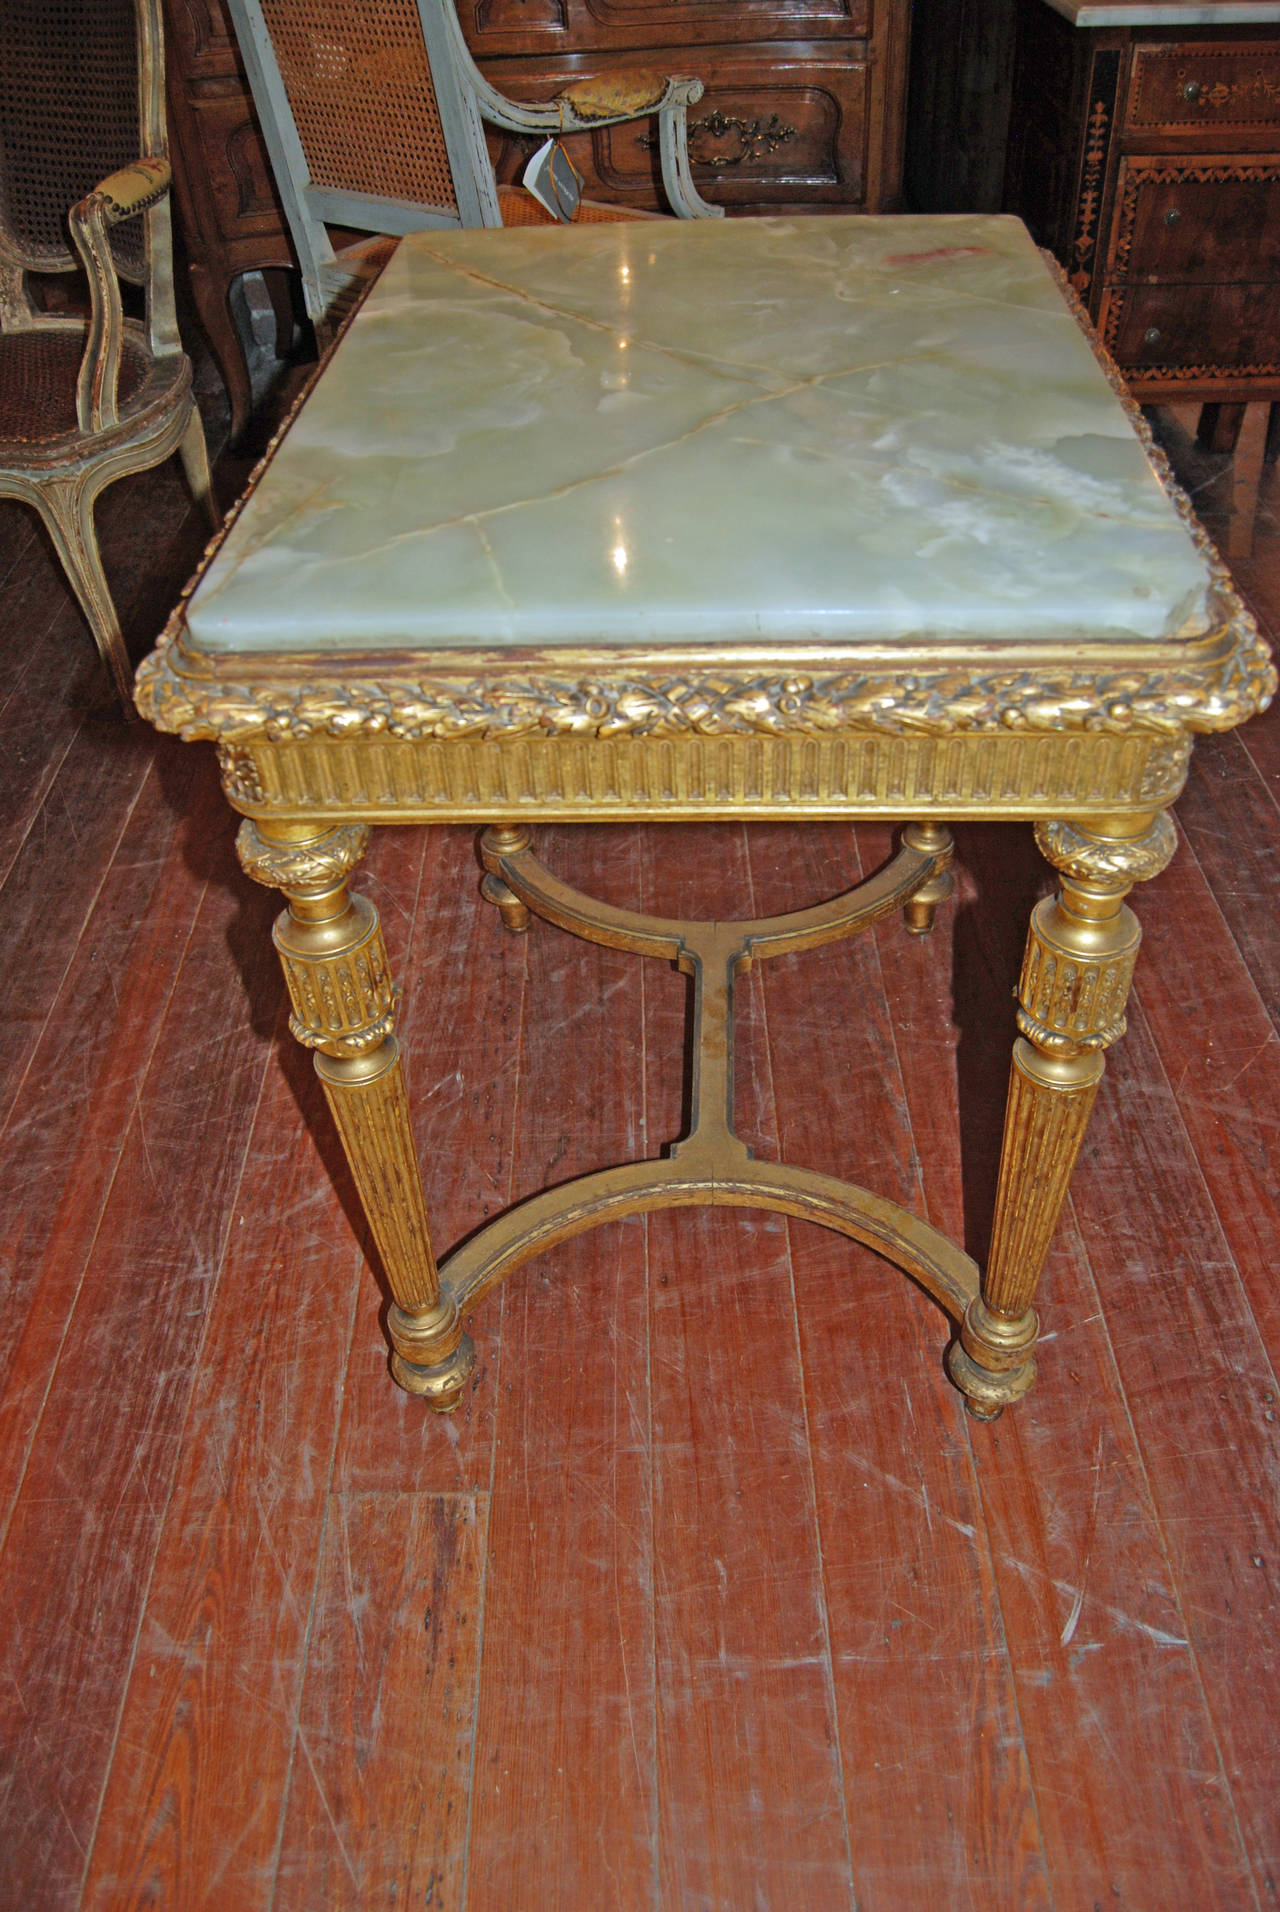 Beautifully carved and gilded French center table with green onyx.